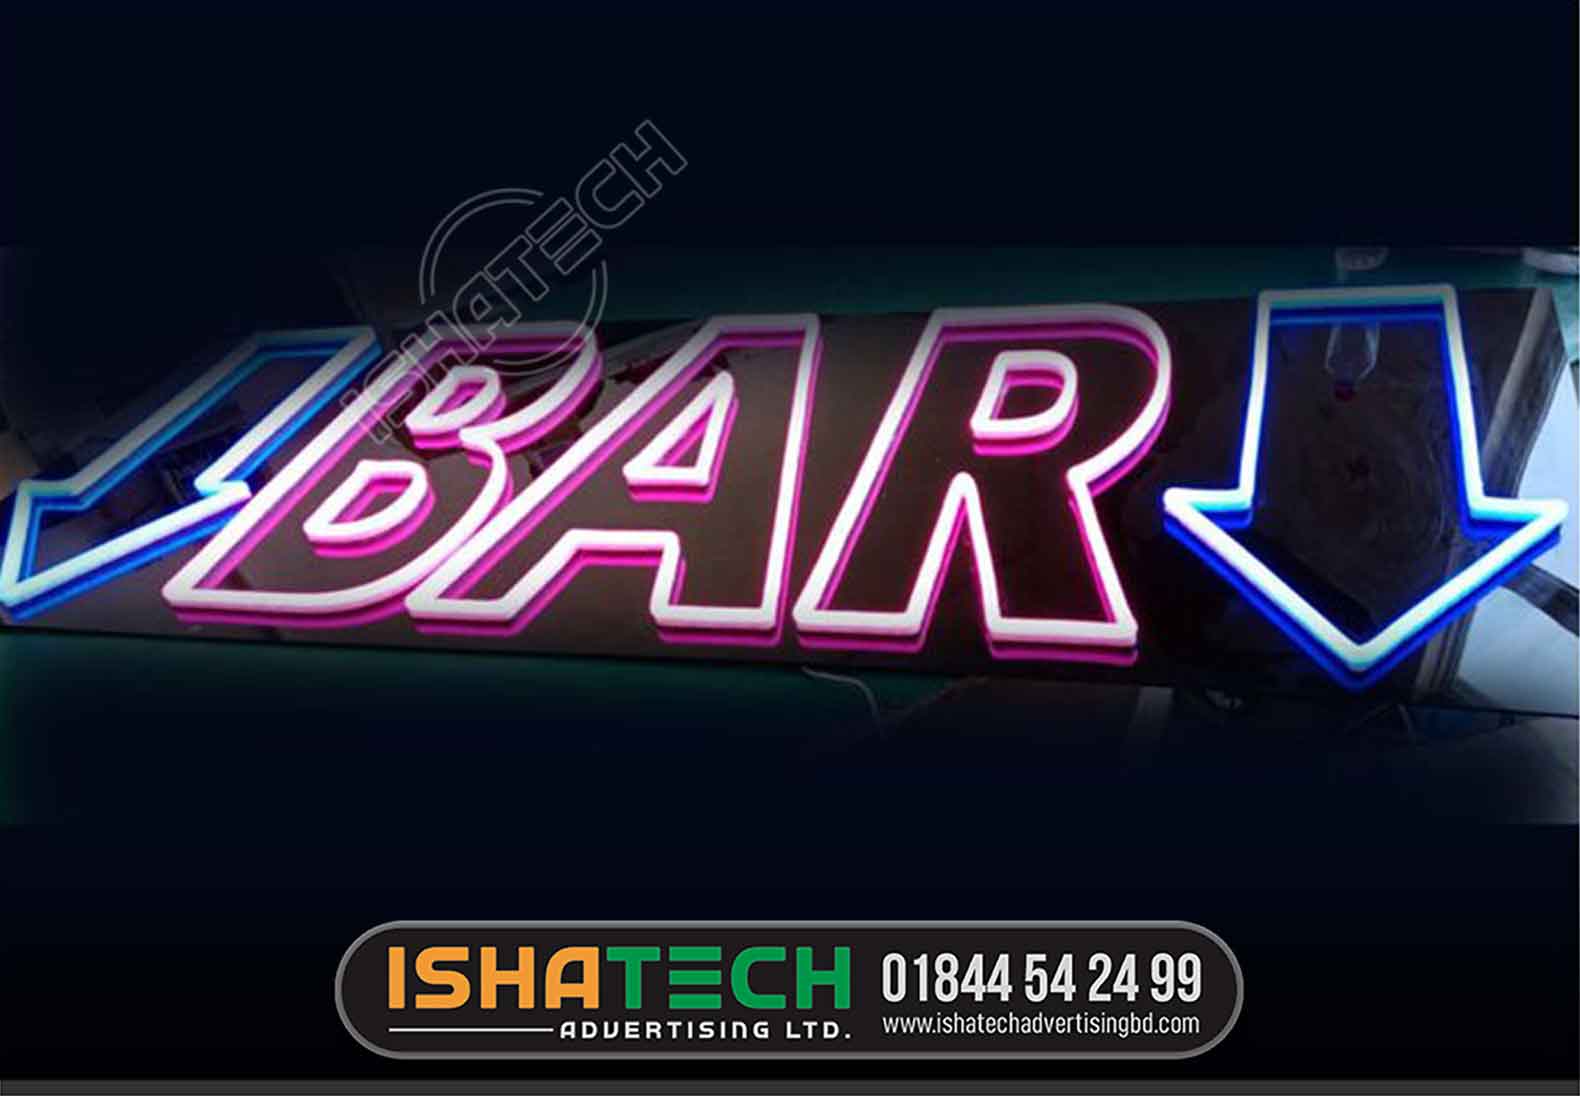 BAR NEON SIGN, Neon Bar Signs, Bar Neon Light Party Wall Hanging LED, Shop for Vibrant Neon Lights for Bars